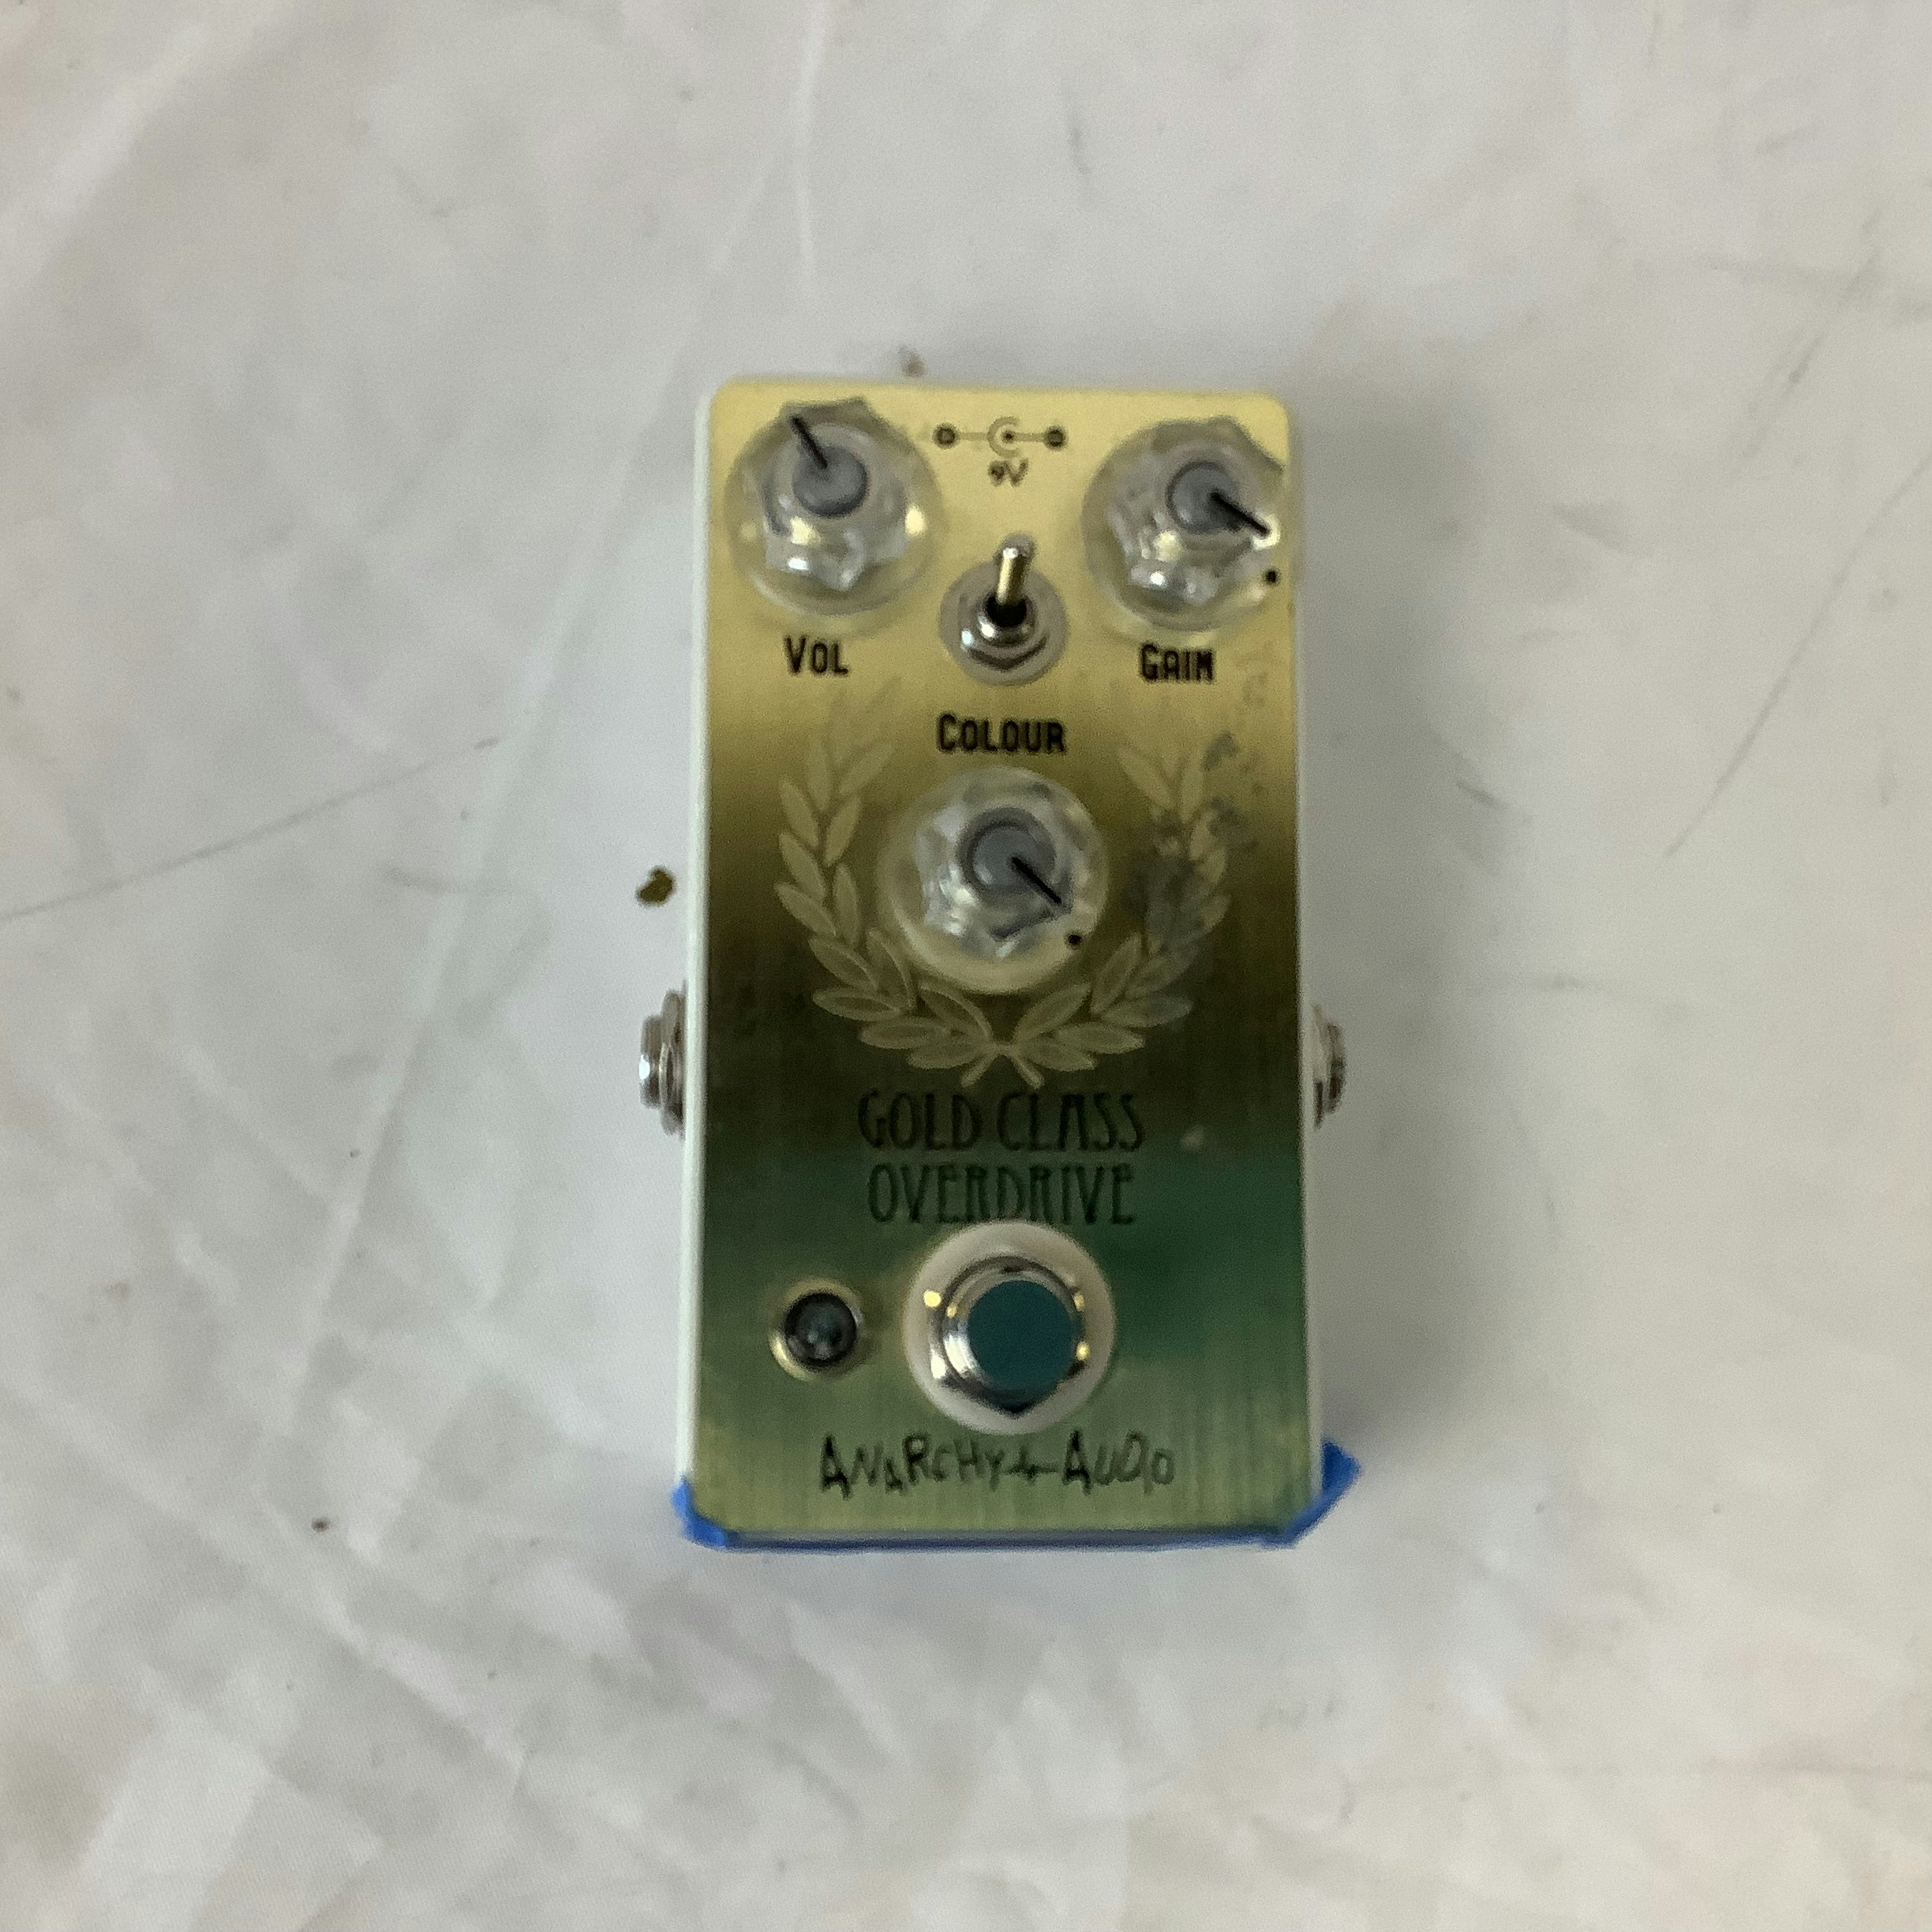 Used ANARCHY AUDIO GOLD CLASS OVERDRIVE Guitar Effects Distortion/Overdrive